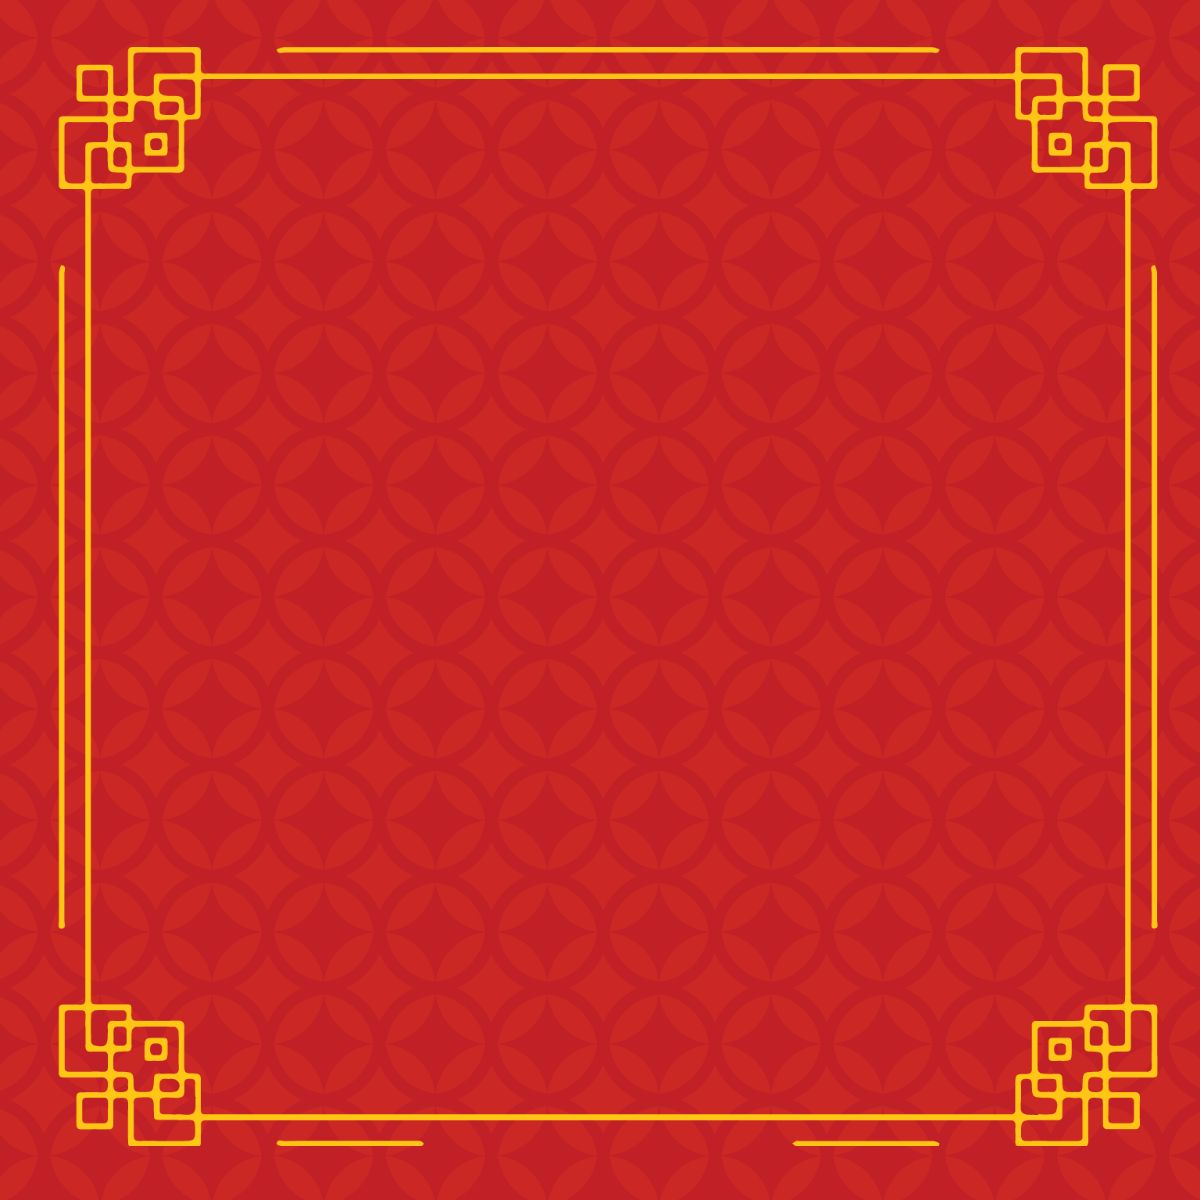 Chinese New Year Frame Vector Template